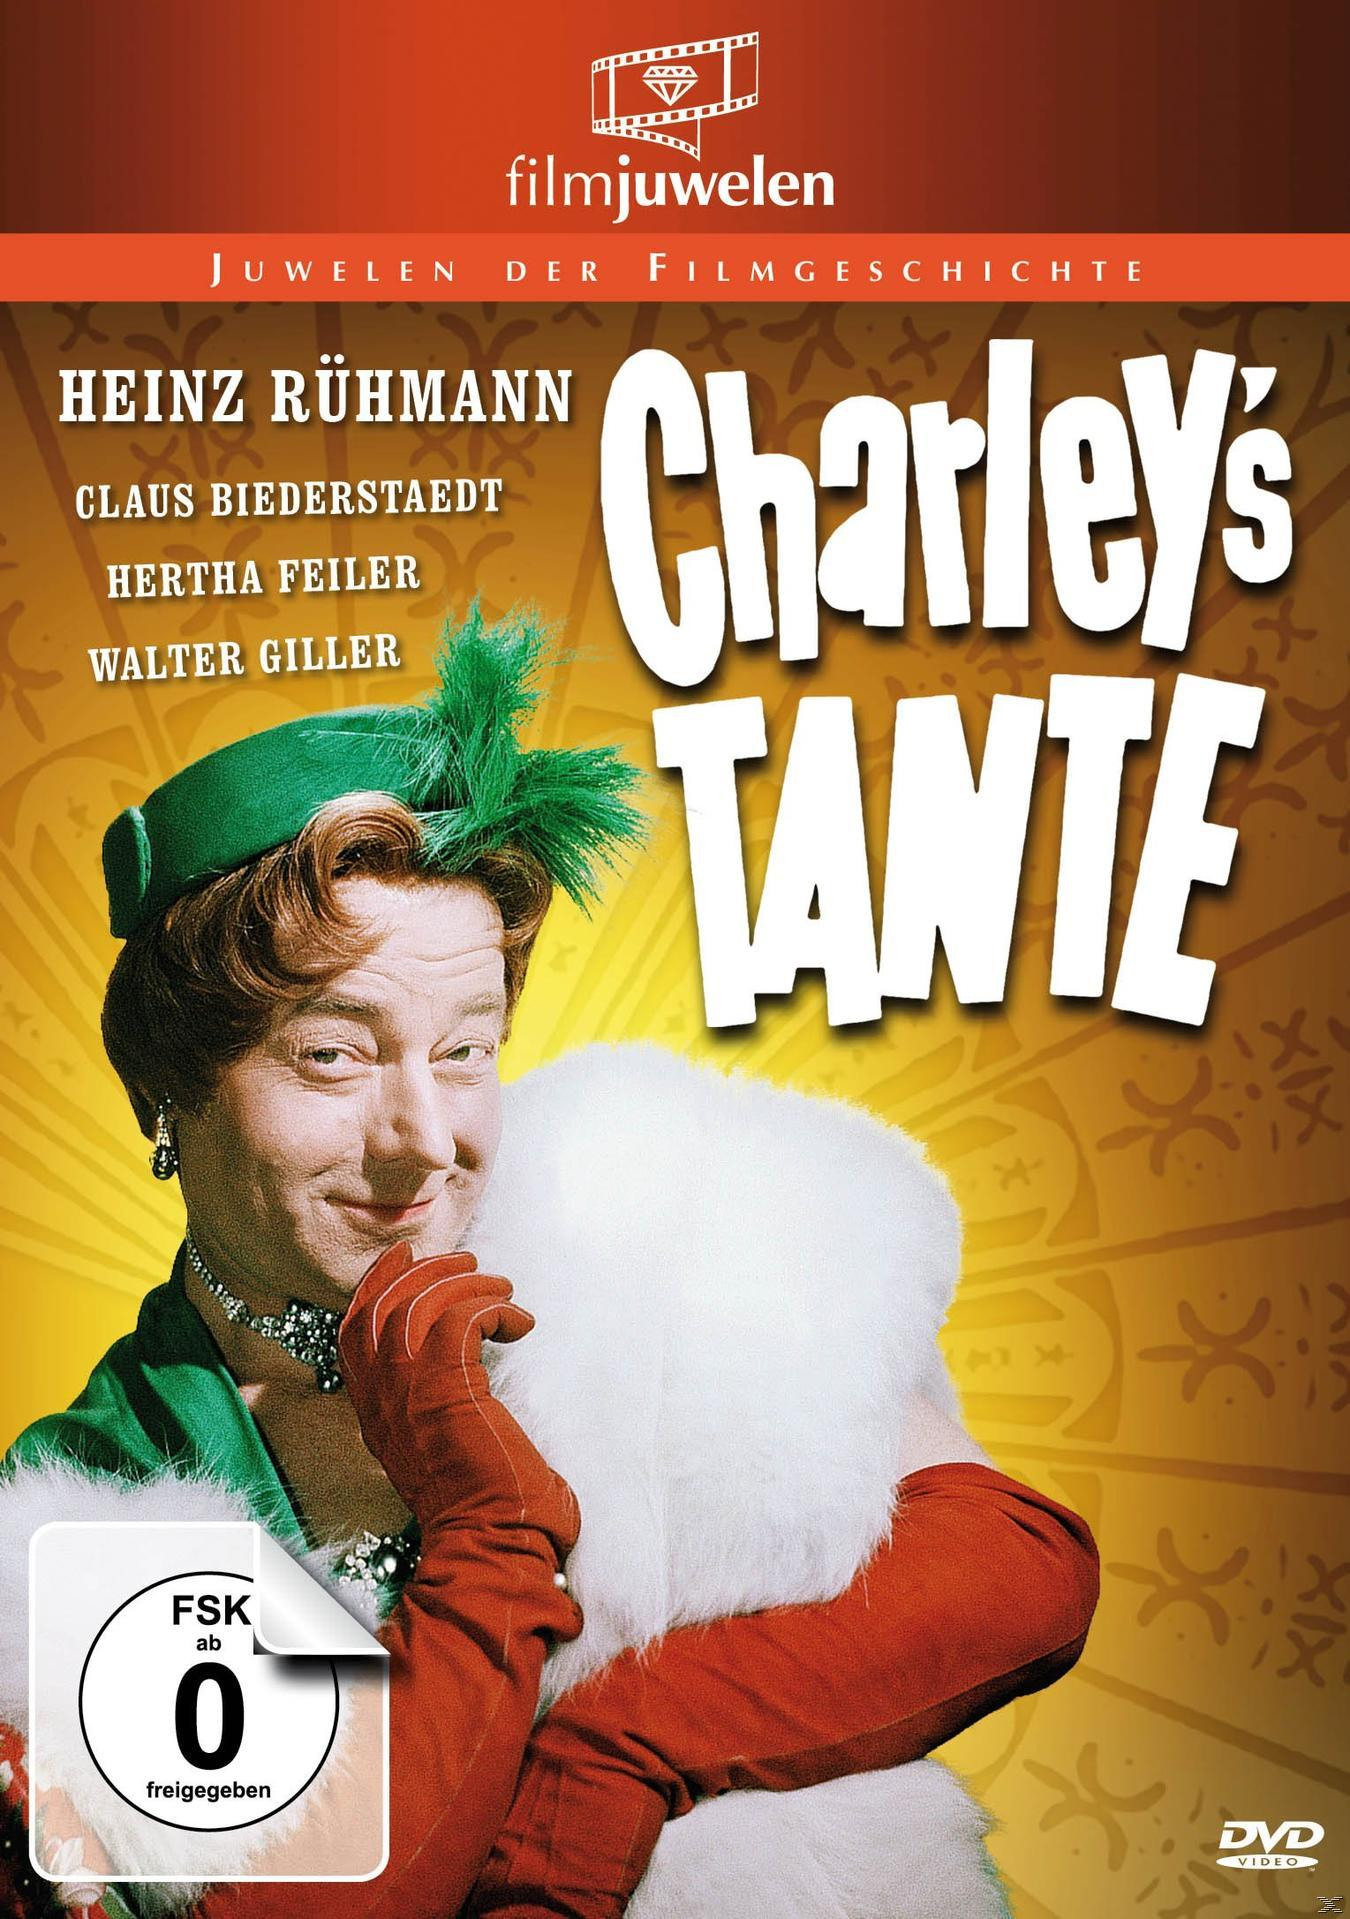 Tante DVD Charley\'s